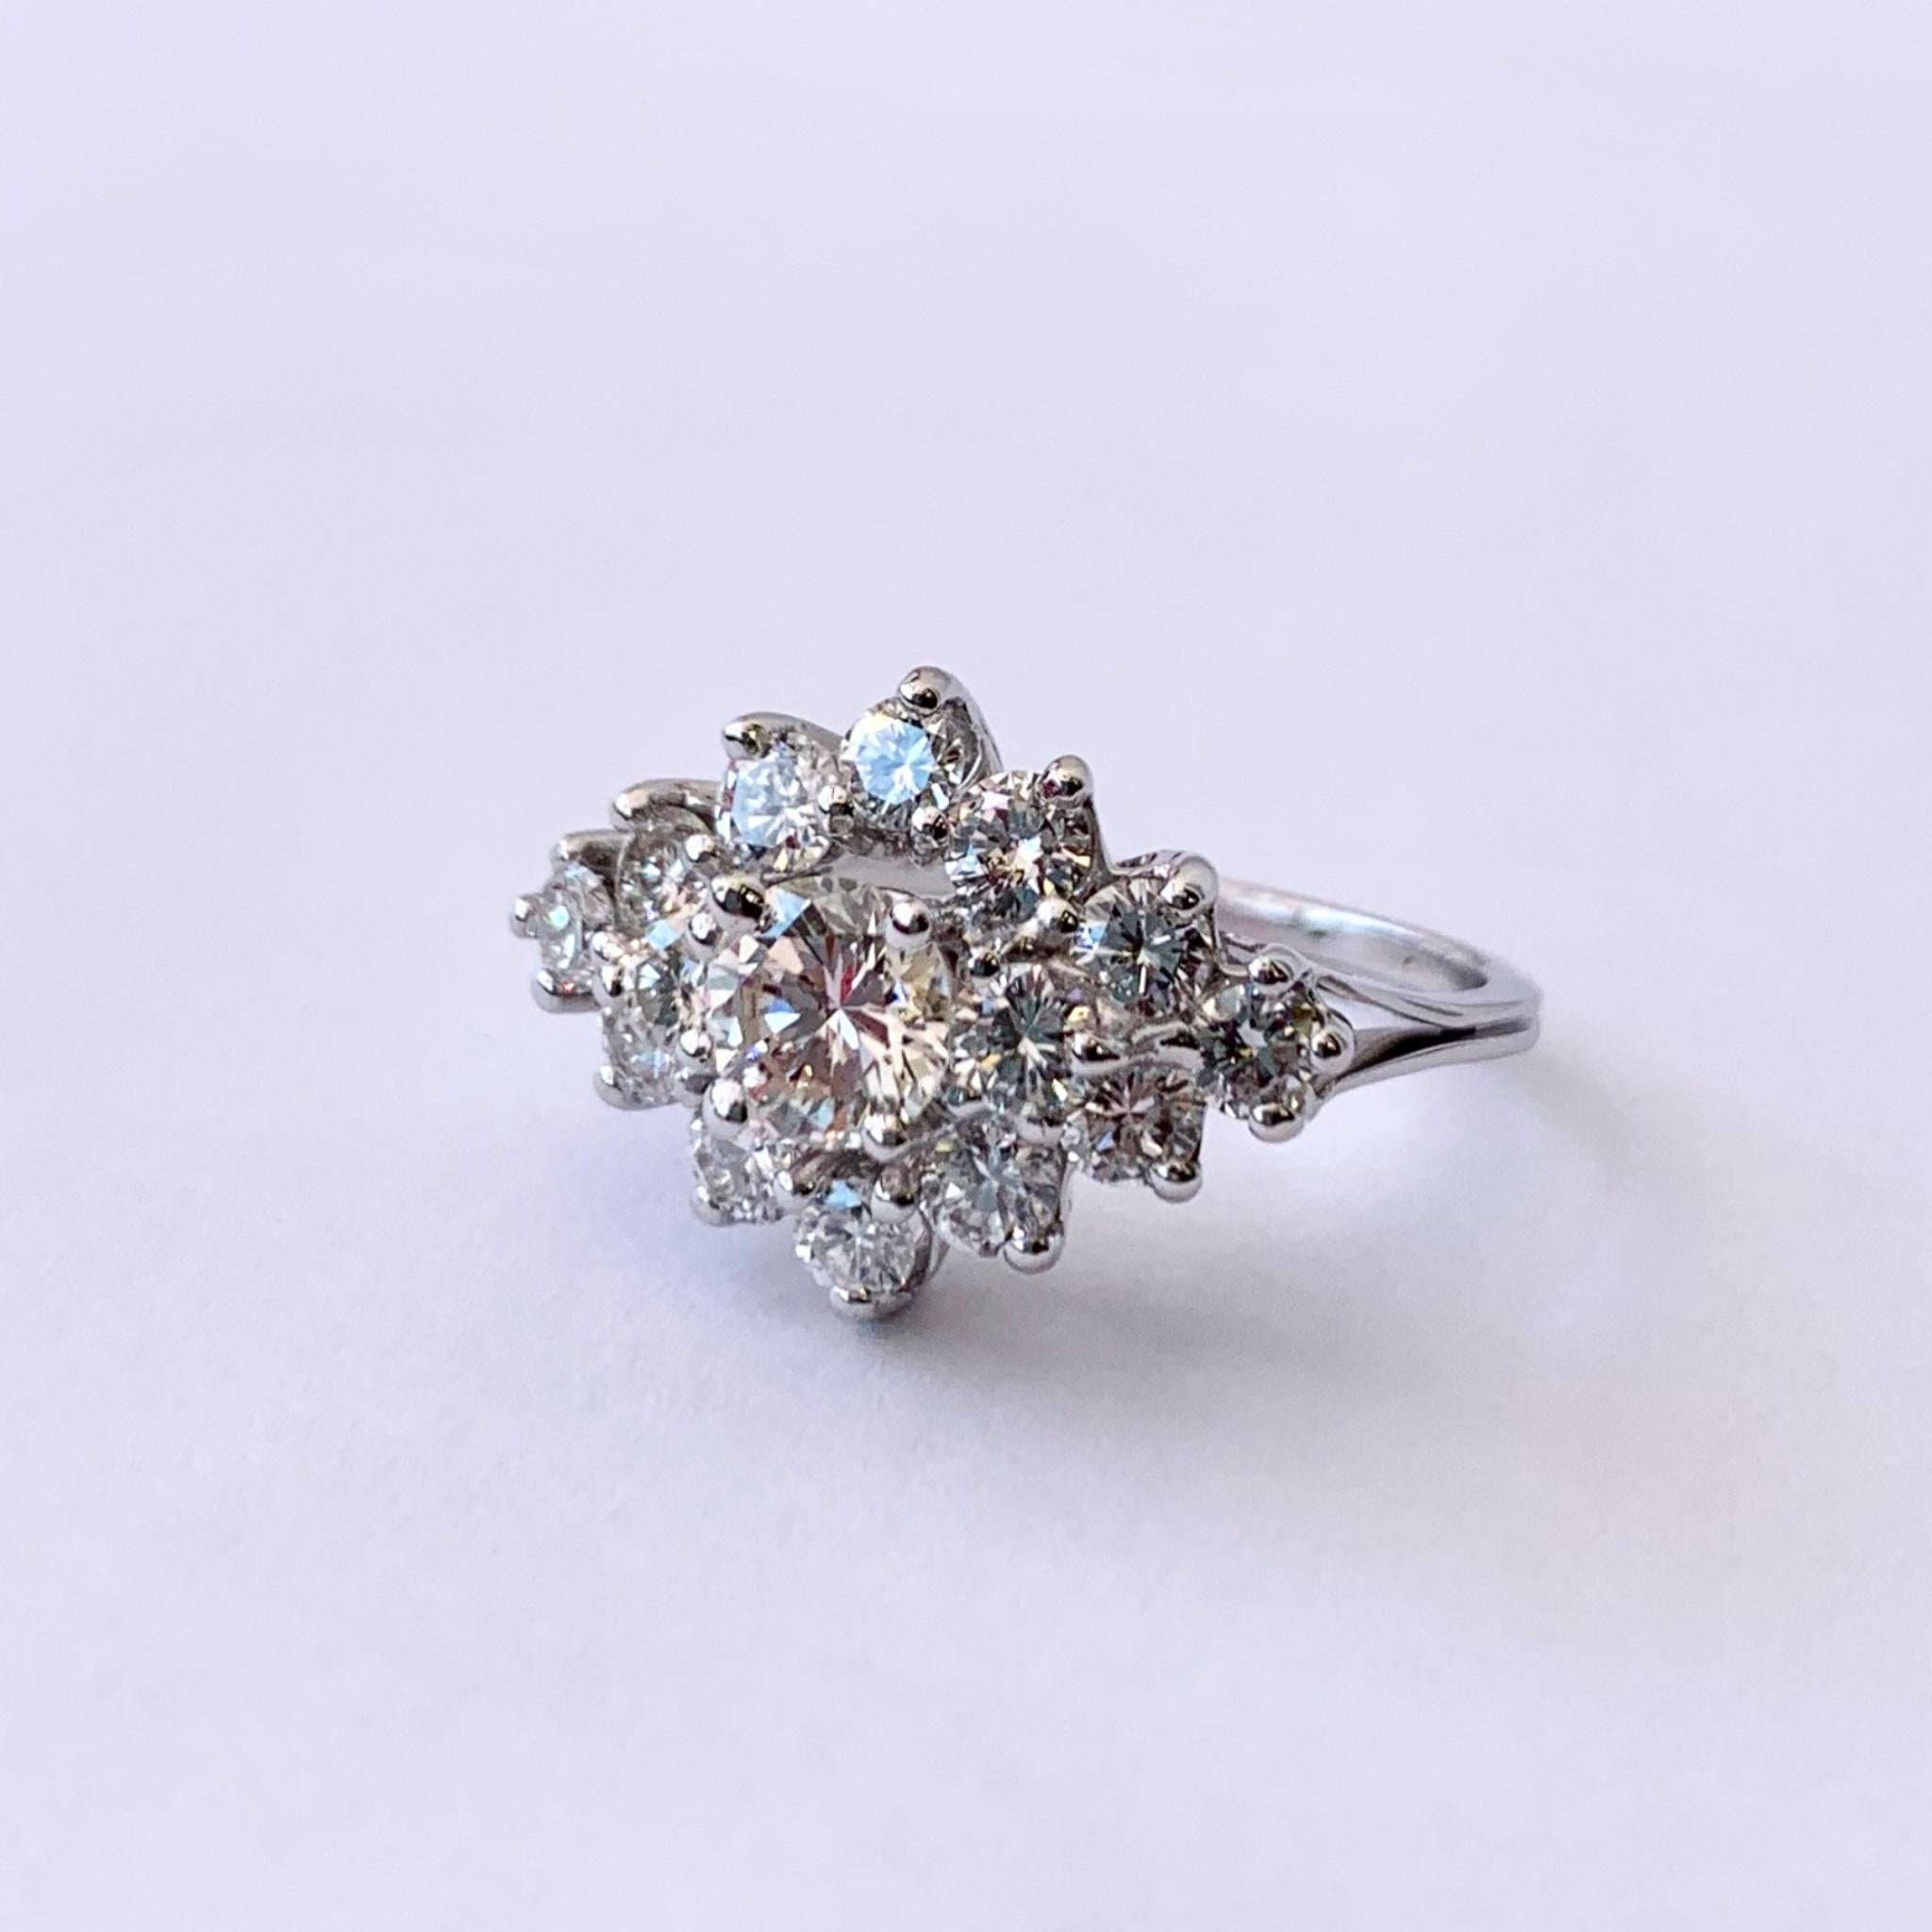 Vintage 14kt white gold cluster cocktail ring, circa 1970's. The ring is set with 15 round brilliant diamonds of varying size with a total weight of approximately 1.94cts. The diamonds average SI, in clarity, and H-I color.
*Ring sizing included